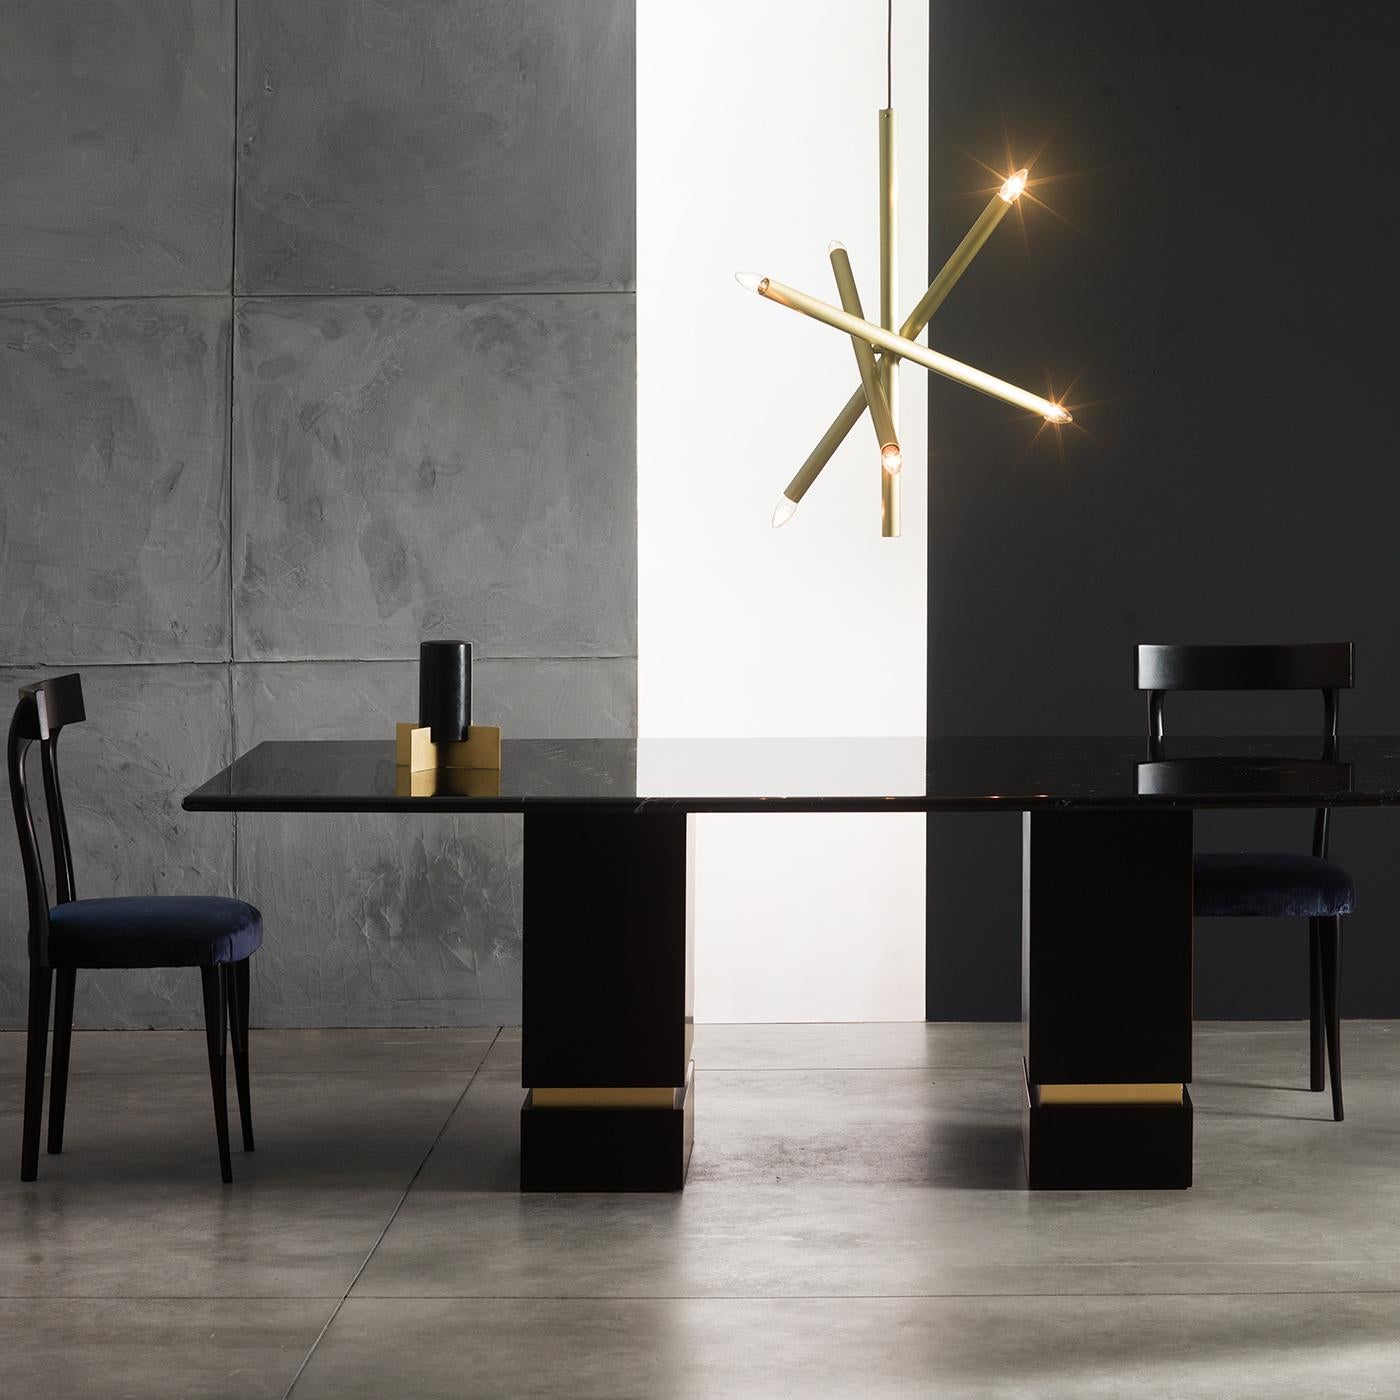 This statement dining table exudes a minimalist elegance, defined by understated geometric lines. Its Marquina black marble top rests upon two wooden cube-shaped bases, embellished with brushed brass inserts. Thanks to its sleek silhouette and